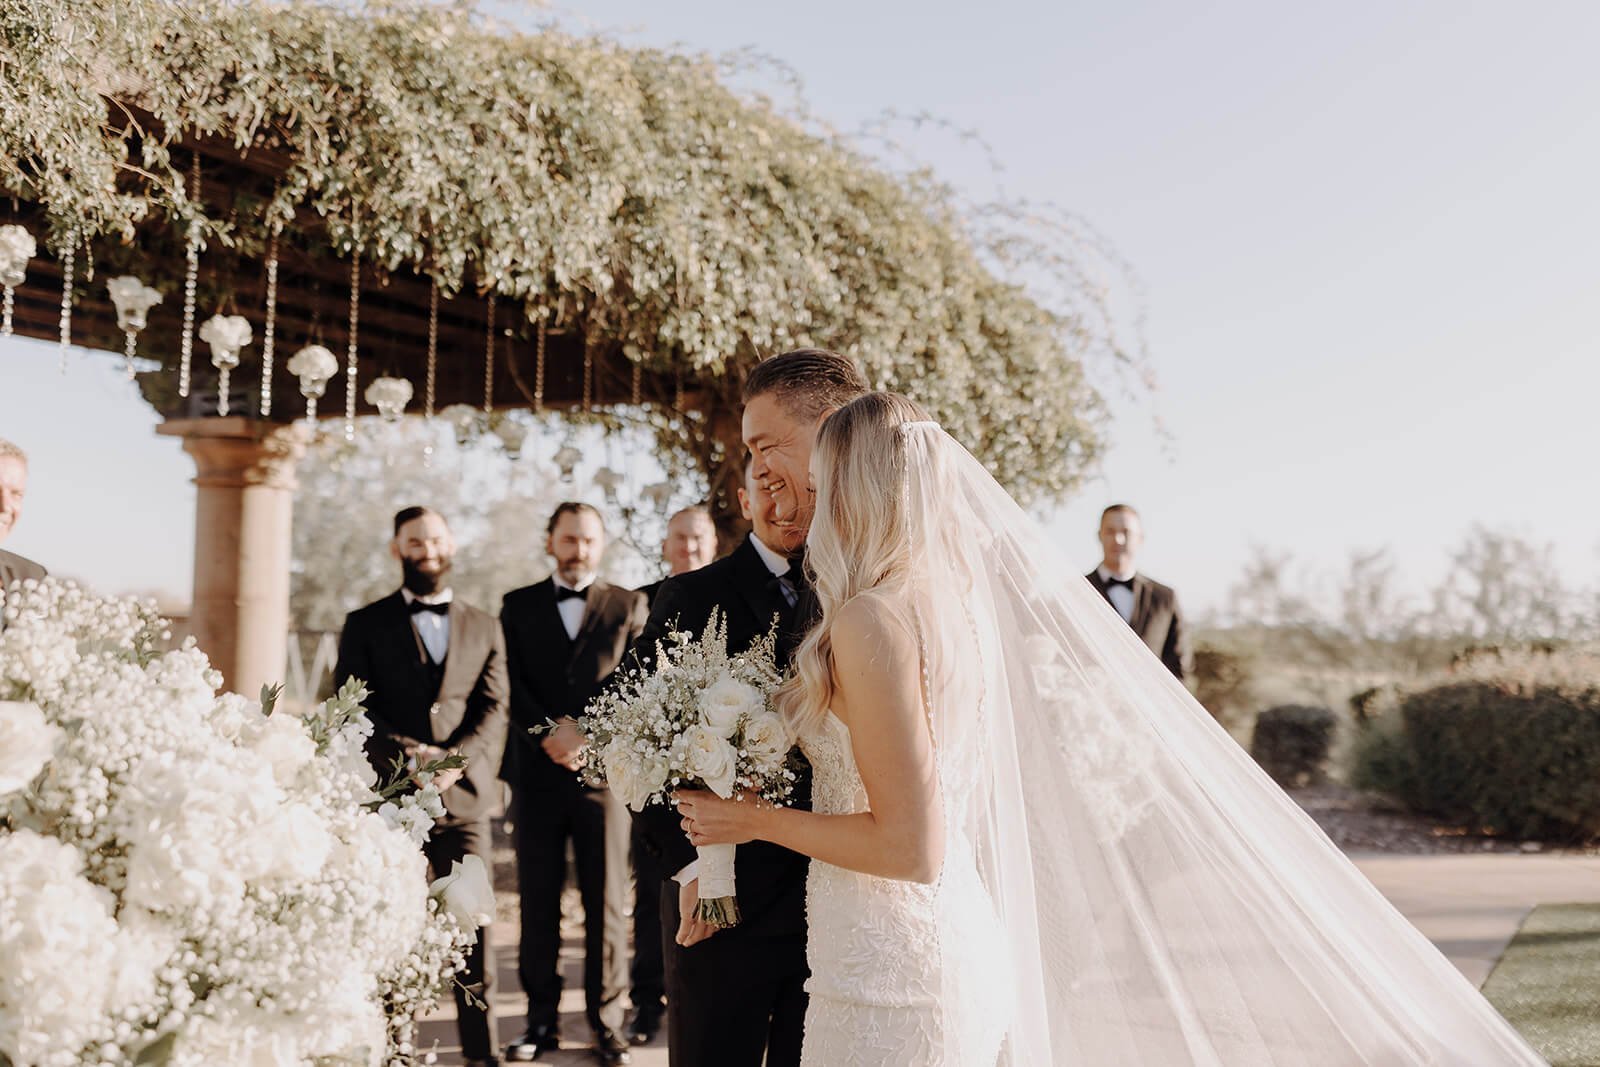 Bride and her father standing at the front of the ceremony aisle at an outdoor wedding in Arizona